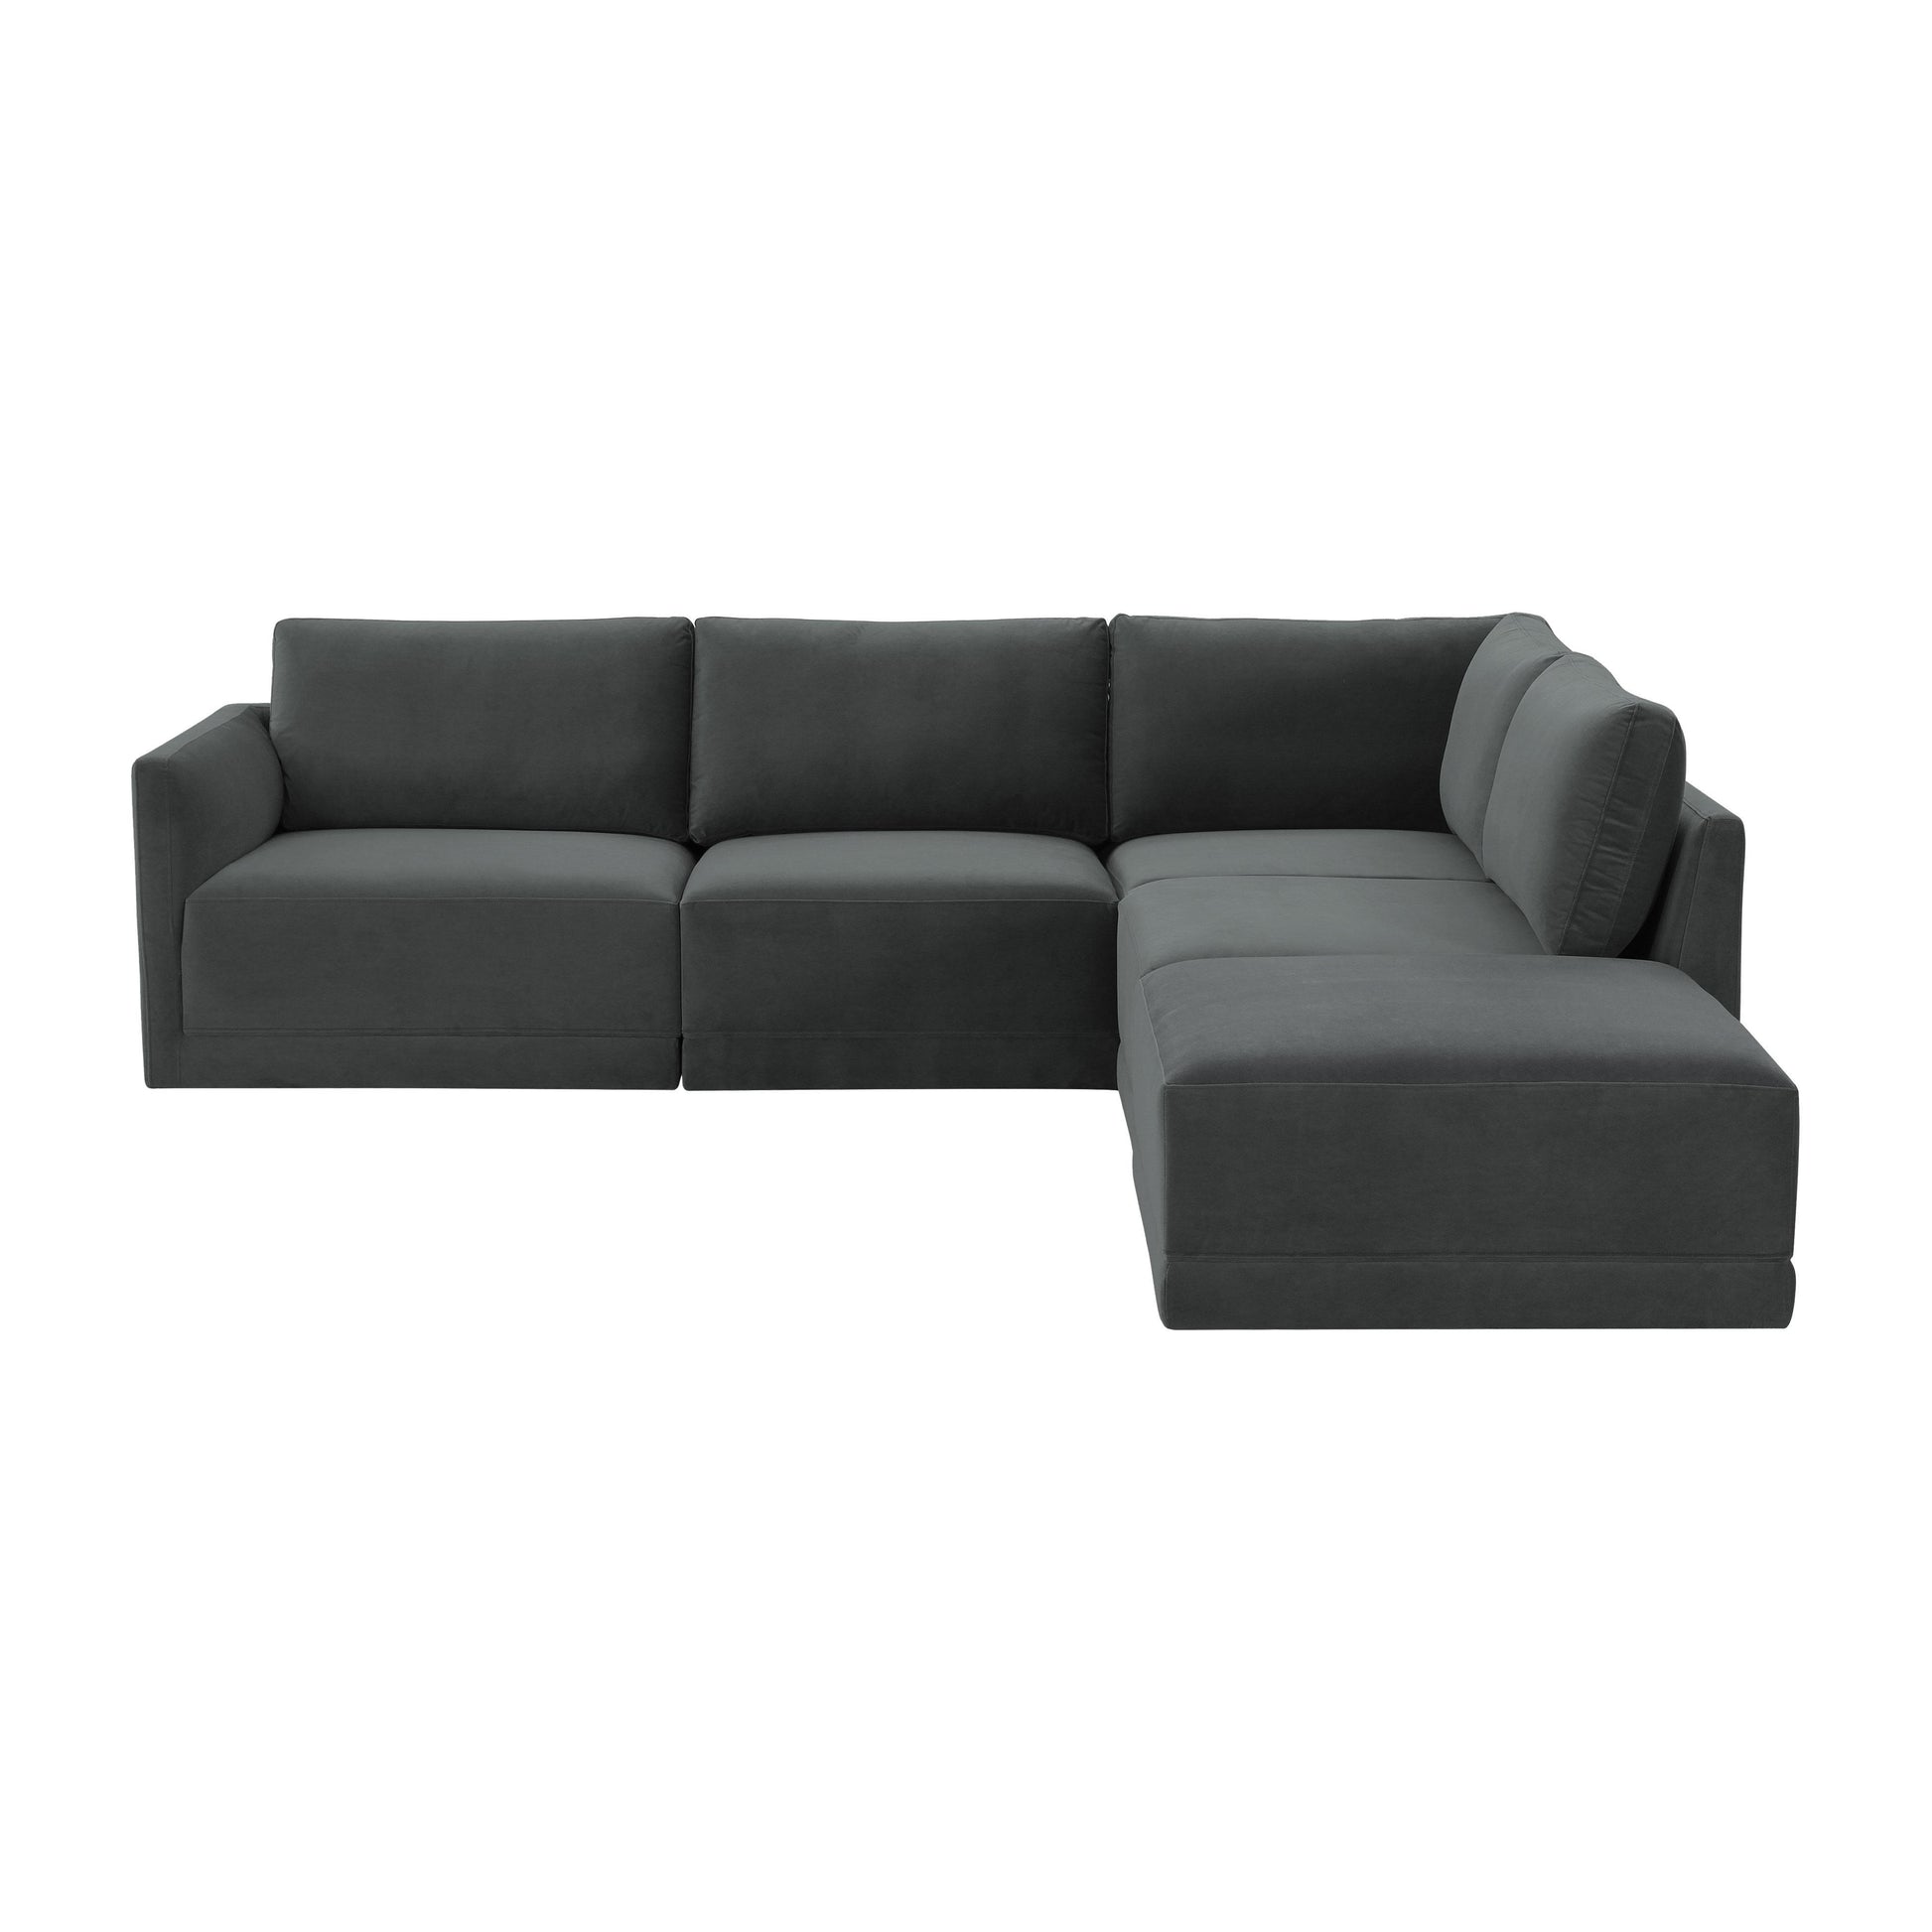 Tov Furniture Willow Charcoal Modular RAF Sectional